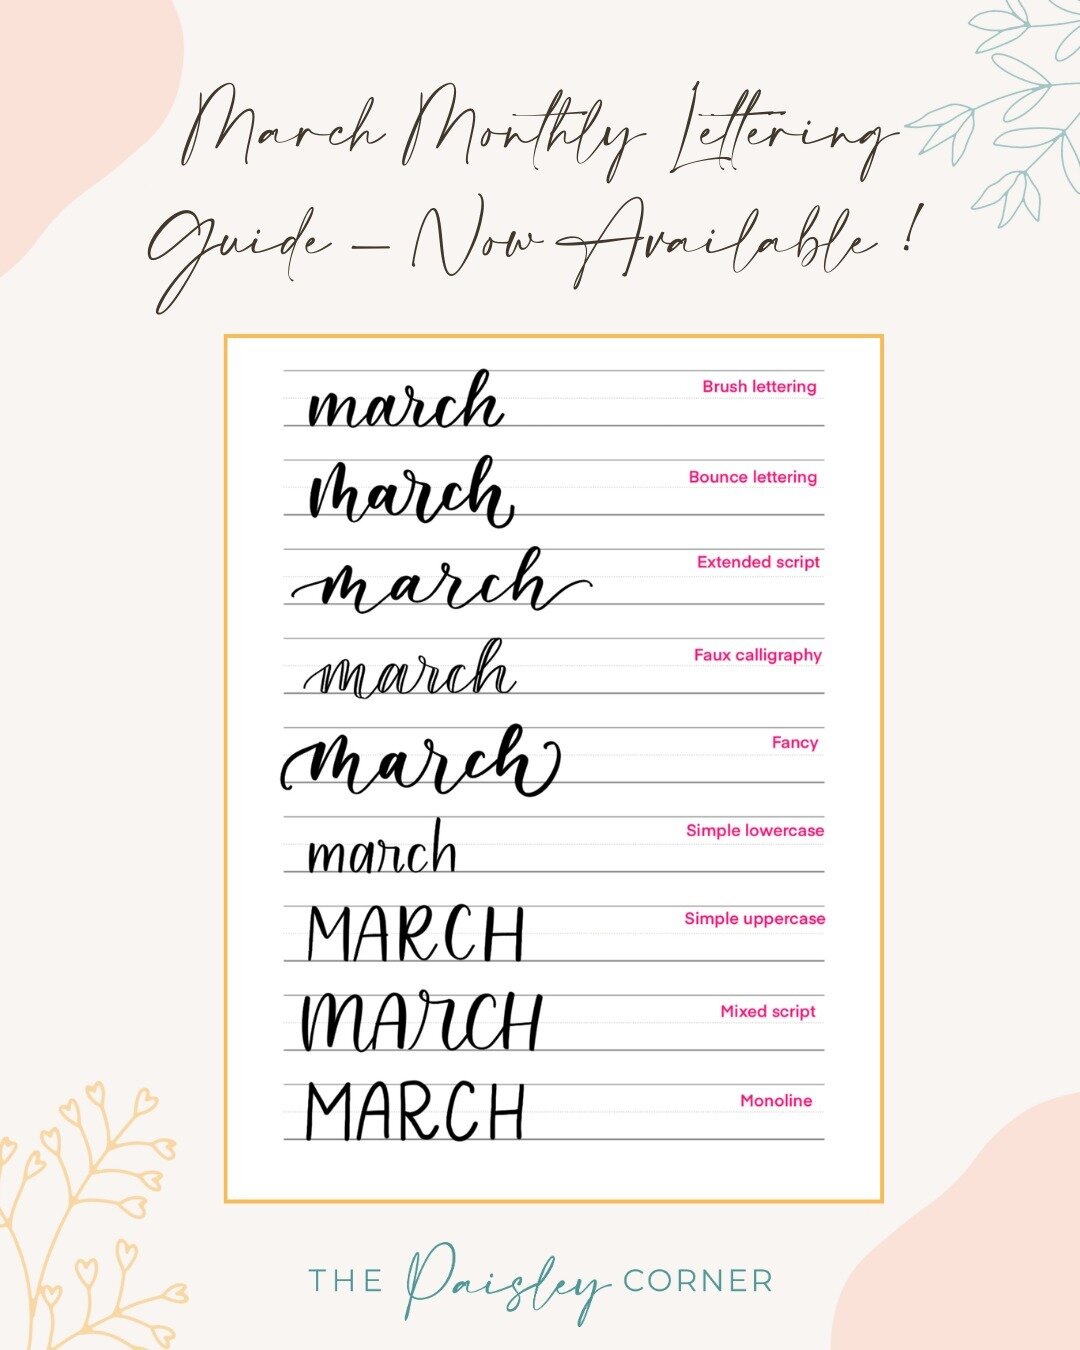 The March monthly lettering guide is now available for download! 

Sign up to get your hands on a complimentary guide every month. 👩&zwj;🎨 Check the link in my bio to learn more!